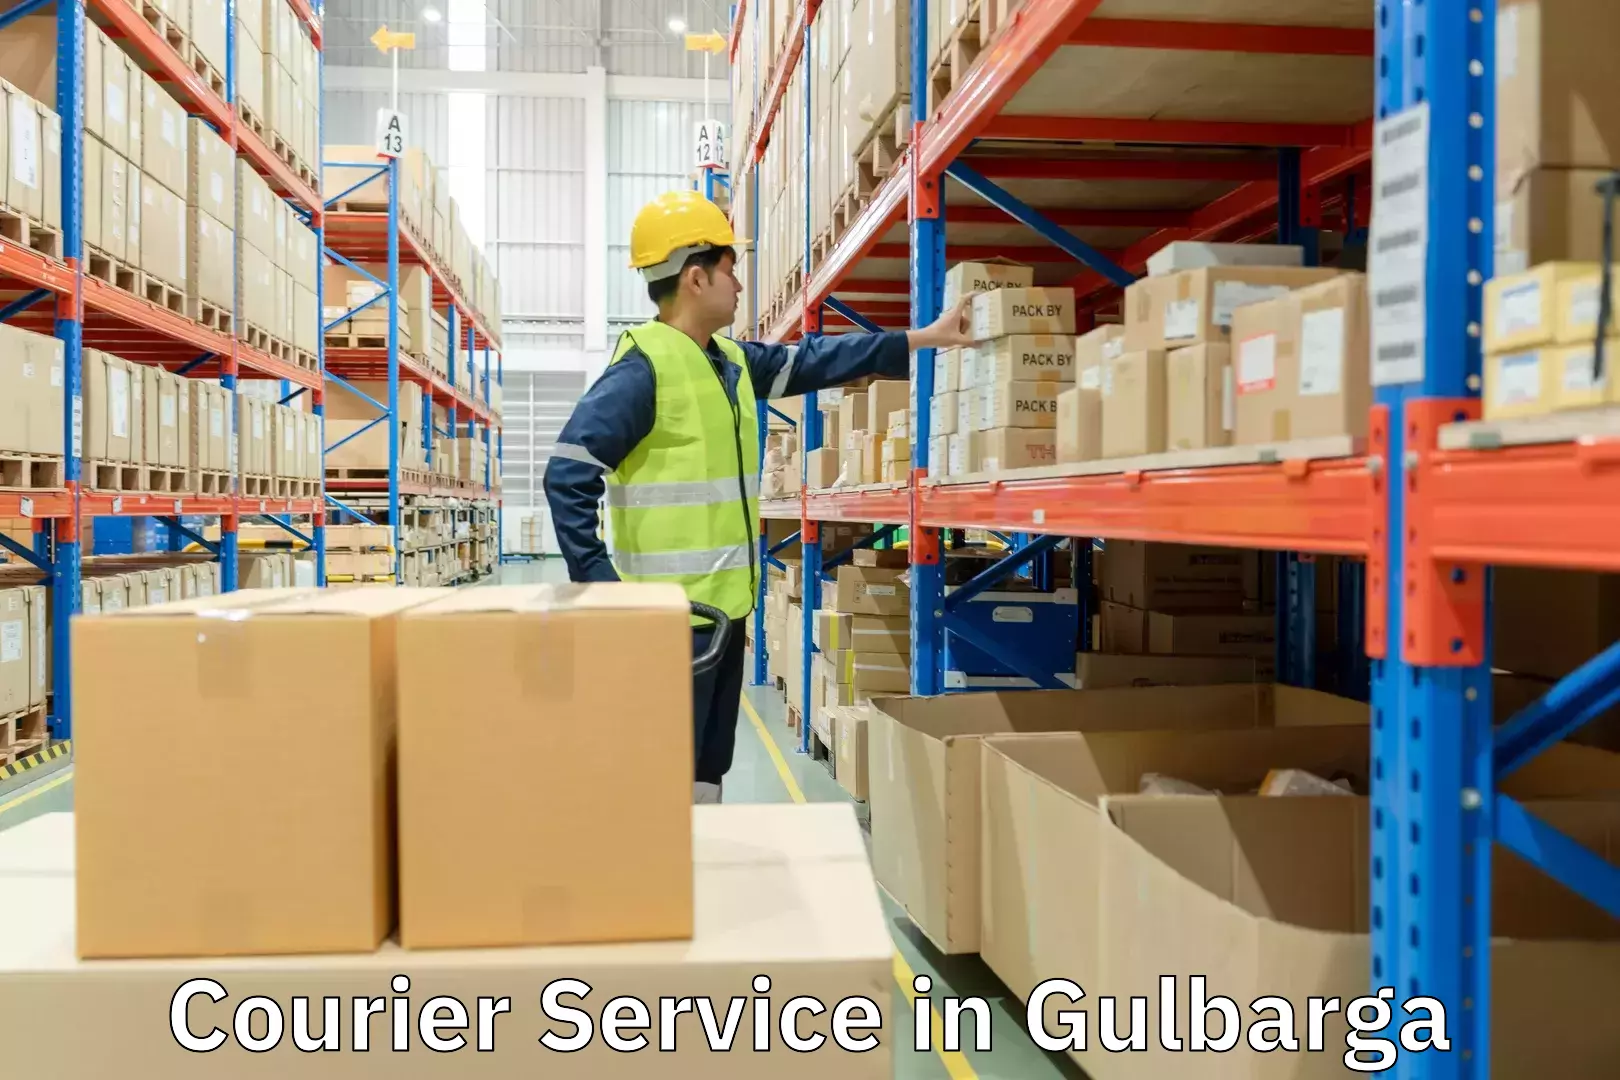 Efficient package consolidation in Gulbarga